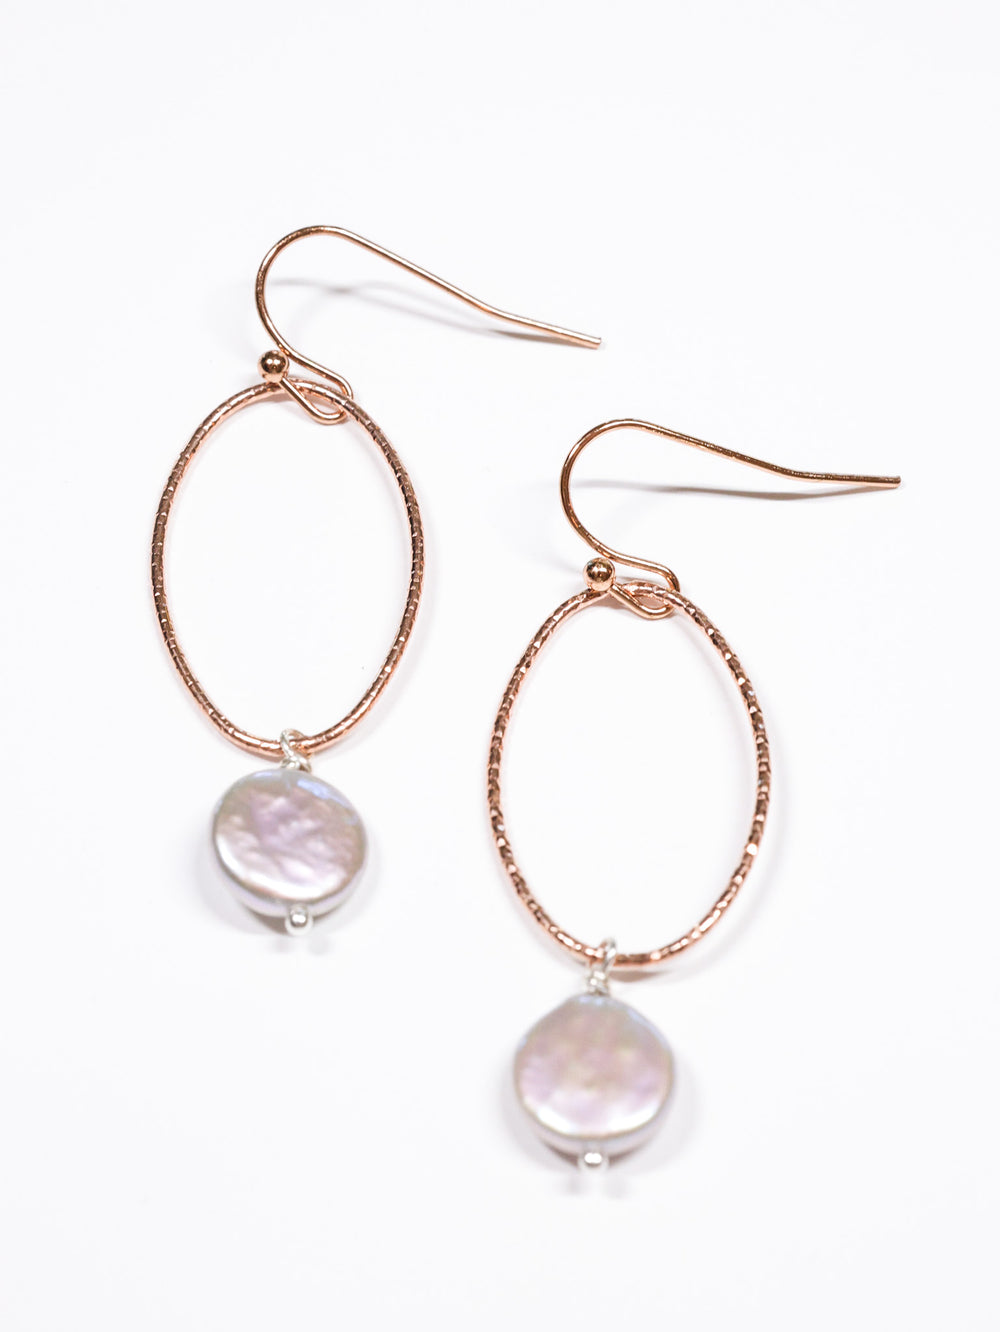 Paxton silver grey pearl nh rose gold earrings